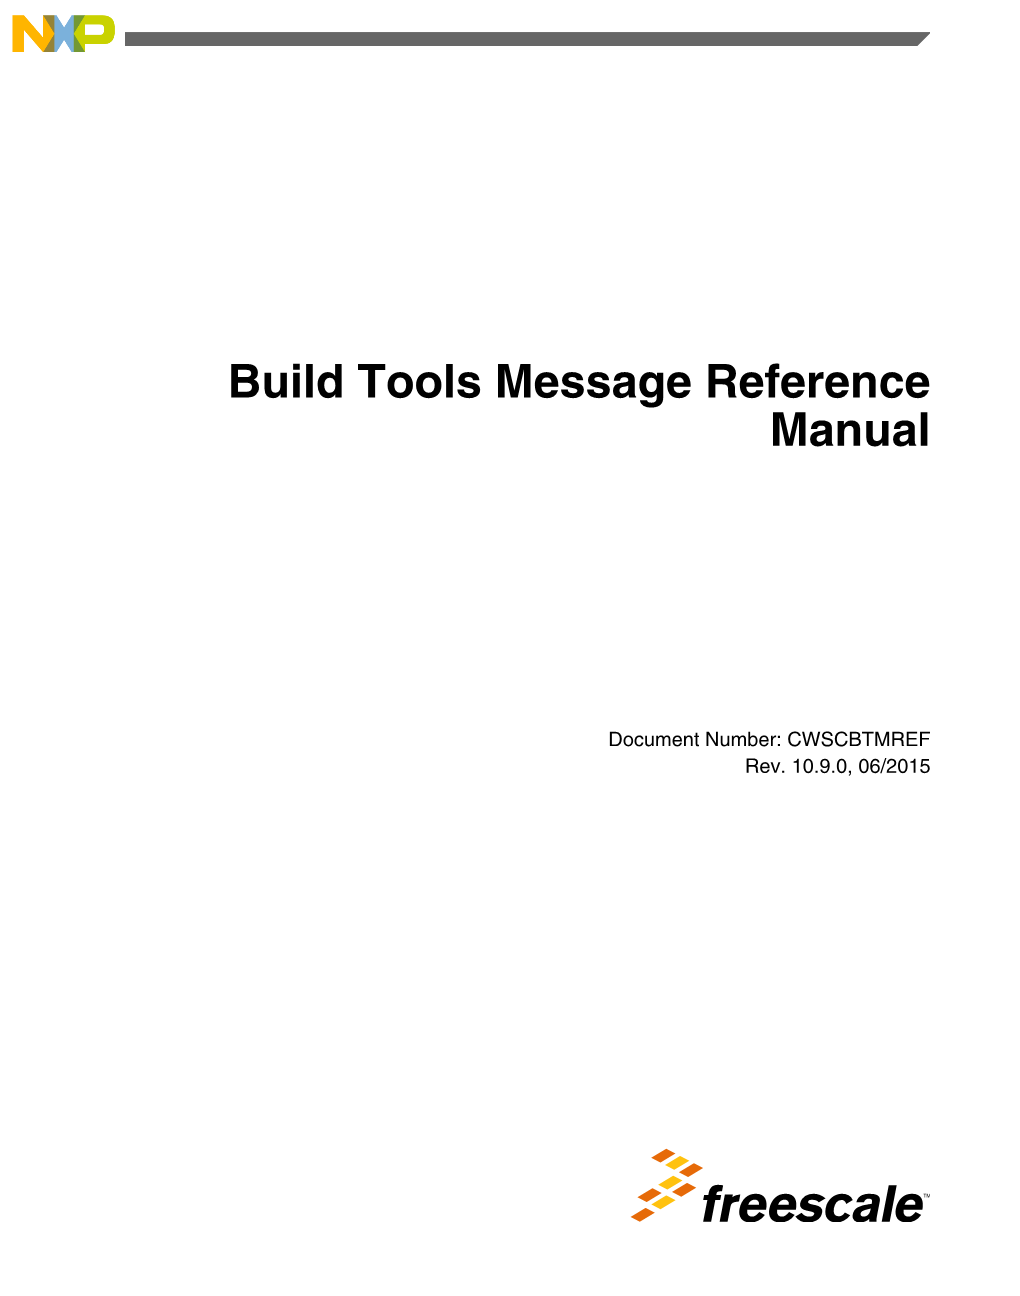 Build Tools Message Reference Manual